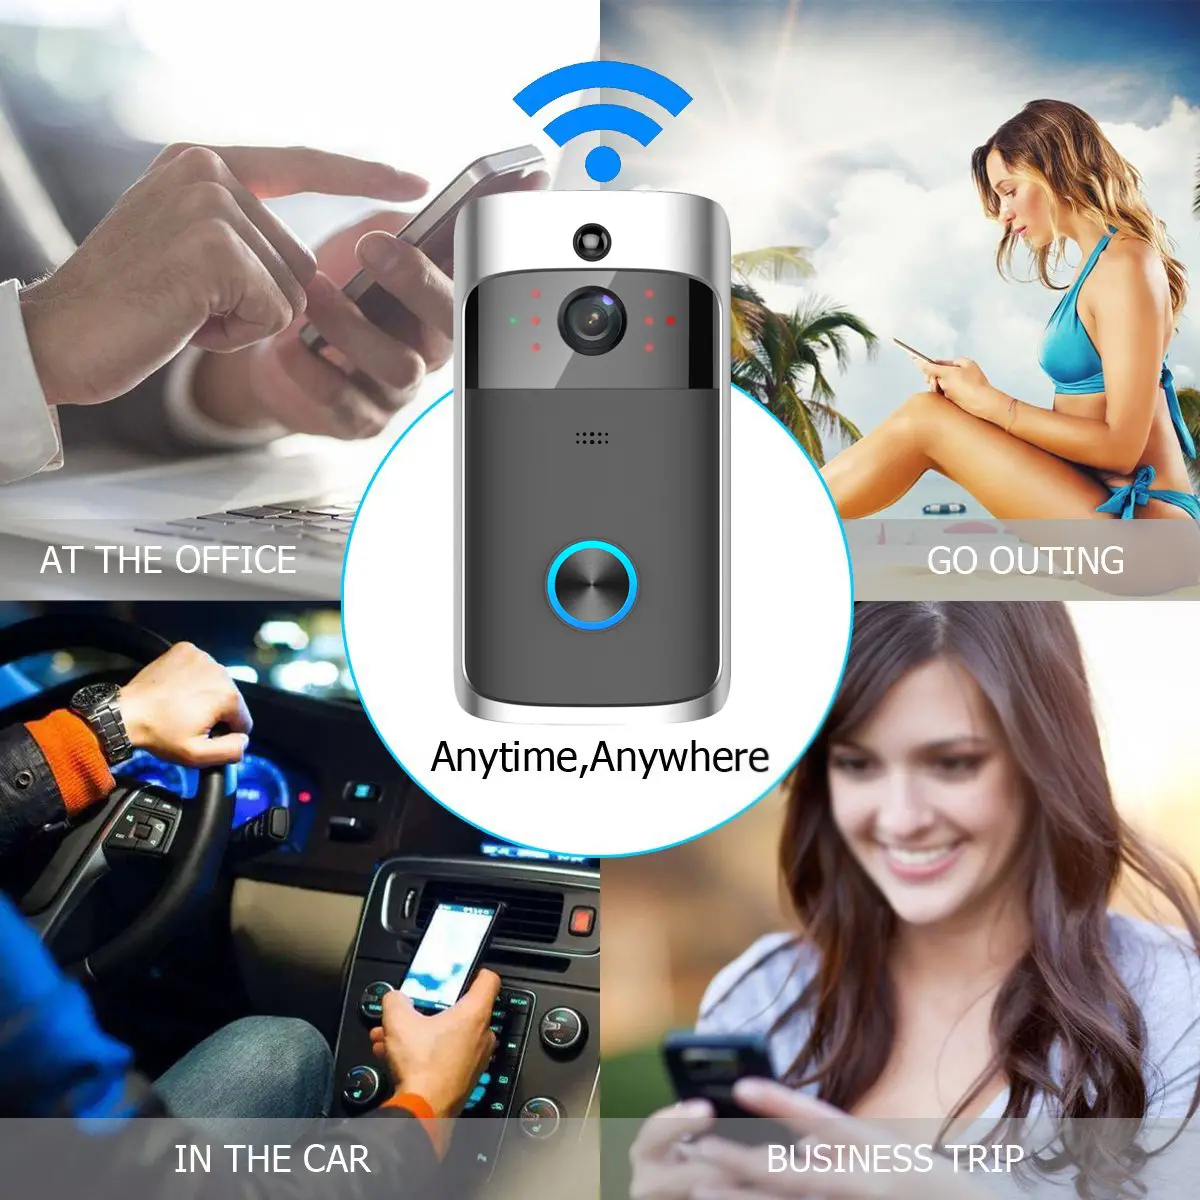 Smart Wireless DoorBell with Night Vision Home Security WiFi Smartphone Remote Video